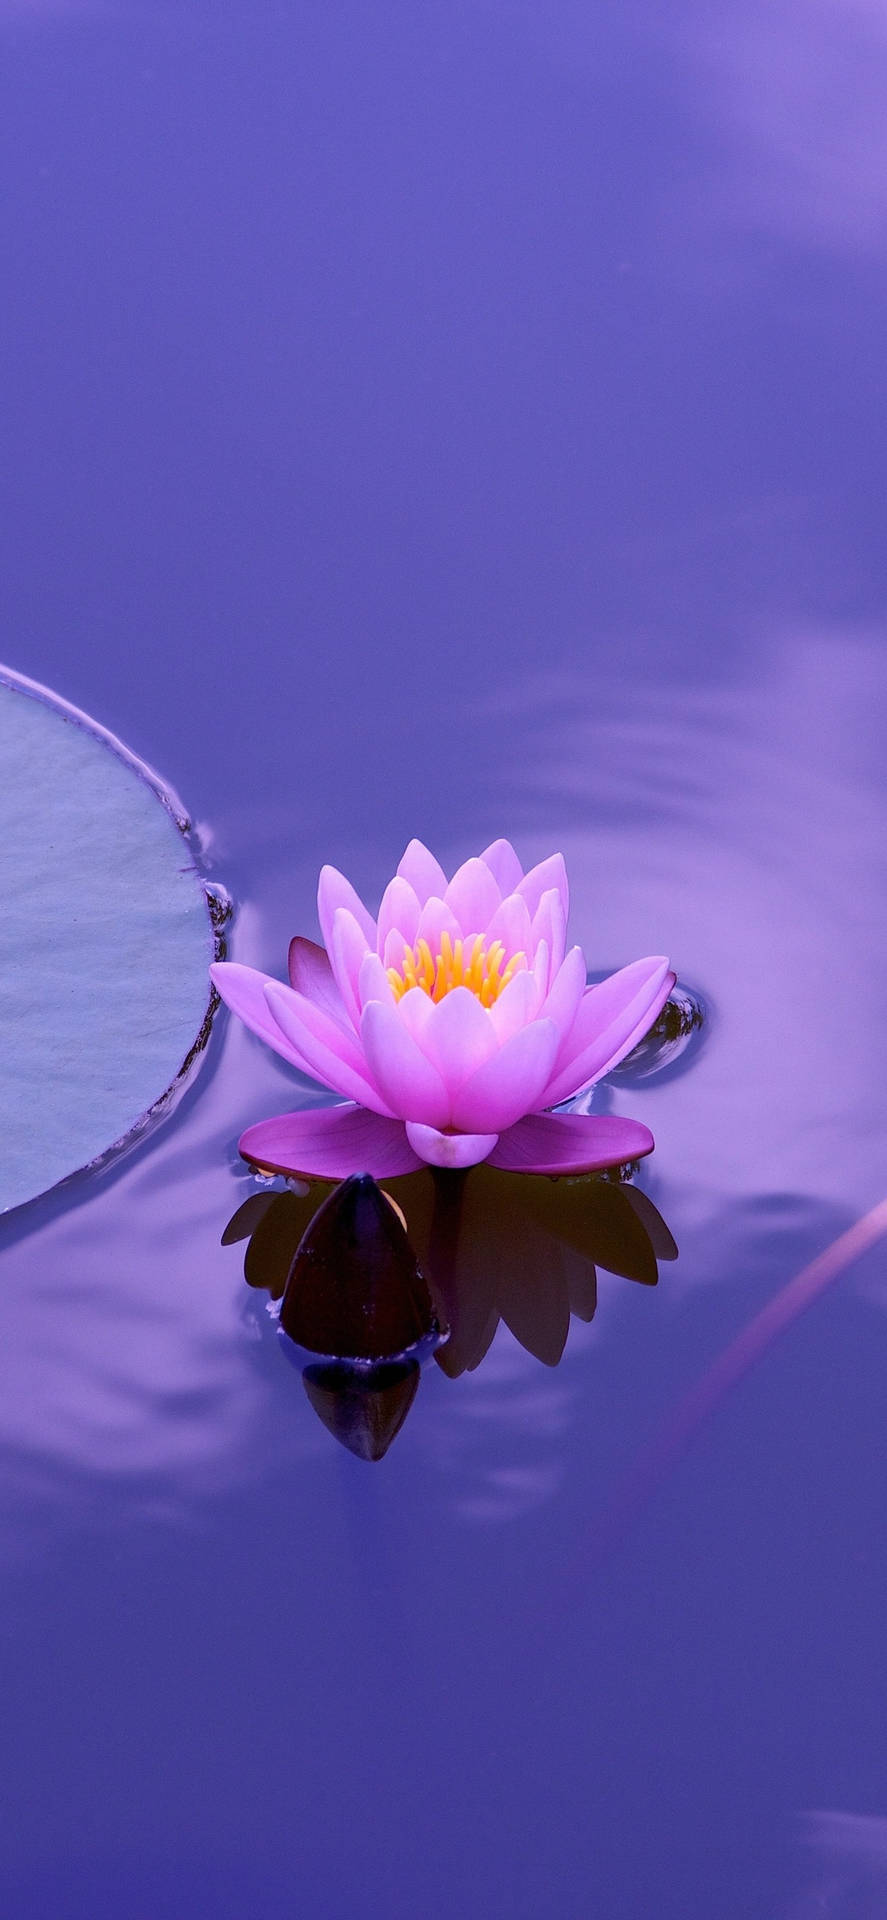 A Pink Flower Floating In A Pond Wallpaper